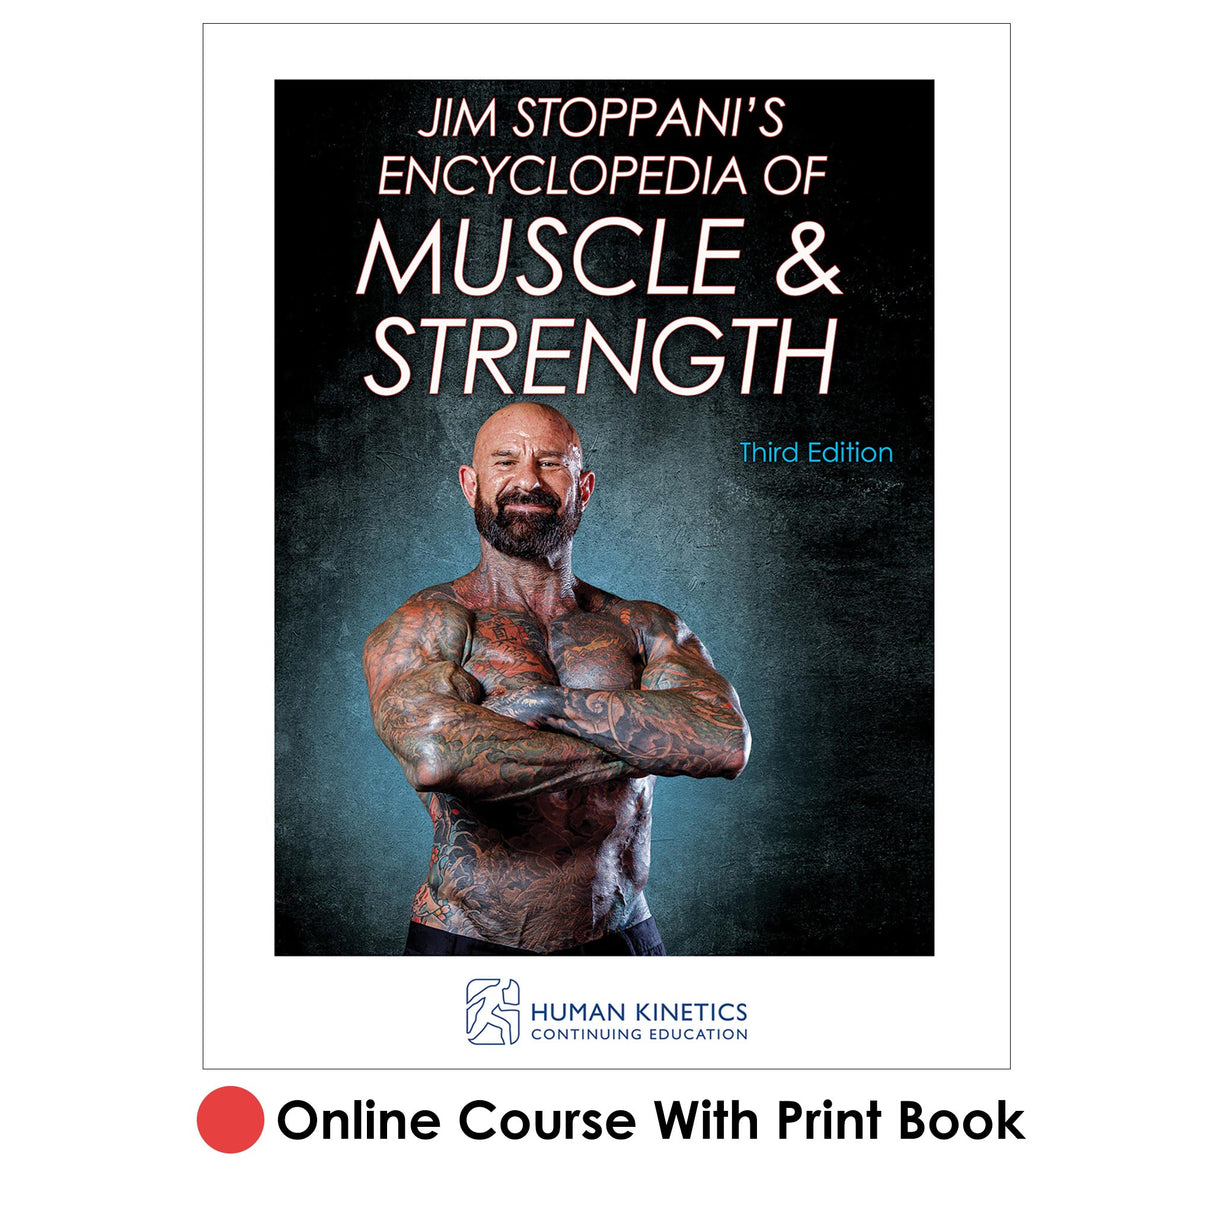 Jim Stoppani's Encyclopedia of Muscle & Strength 3rd Edition Online CE Course With Print Book